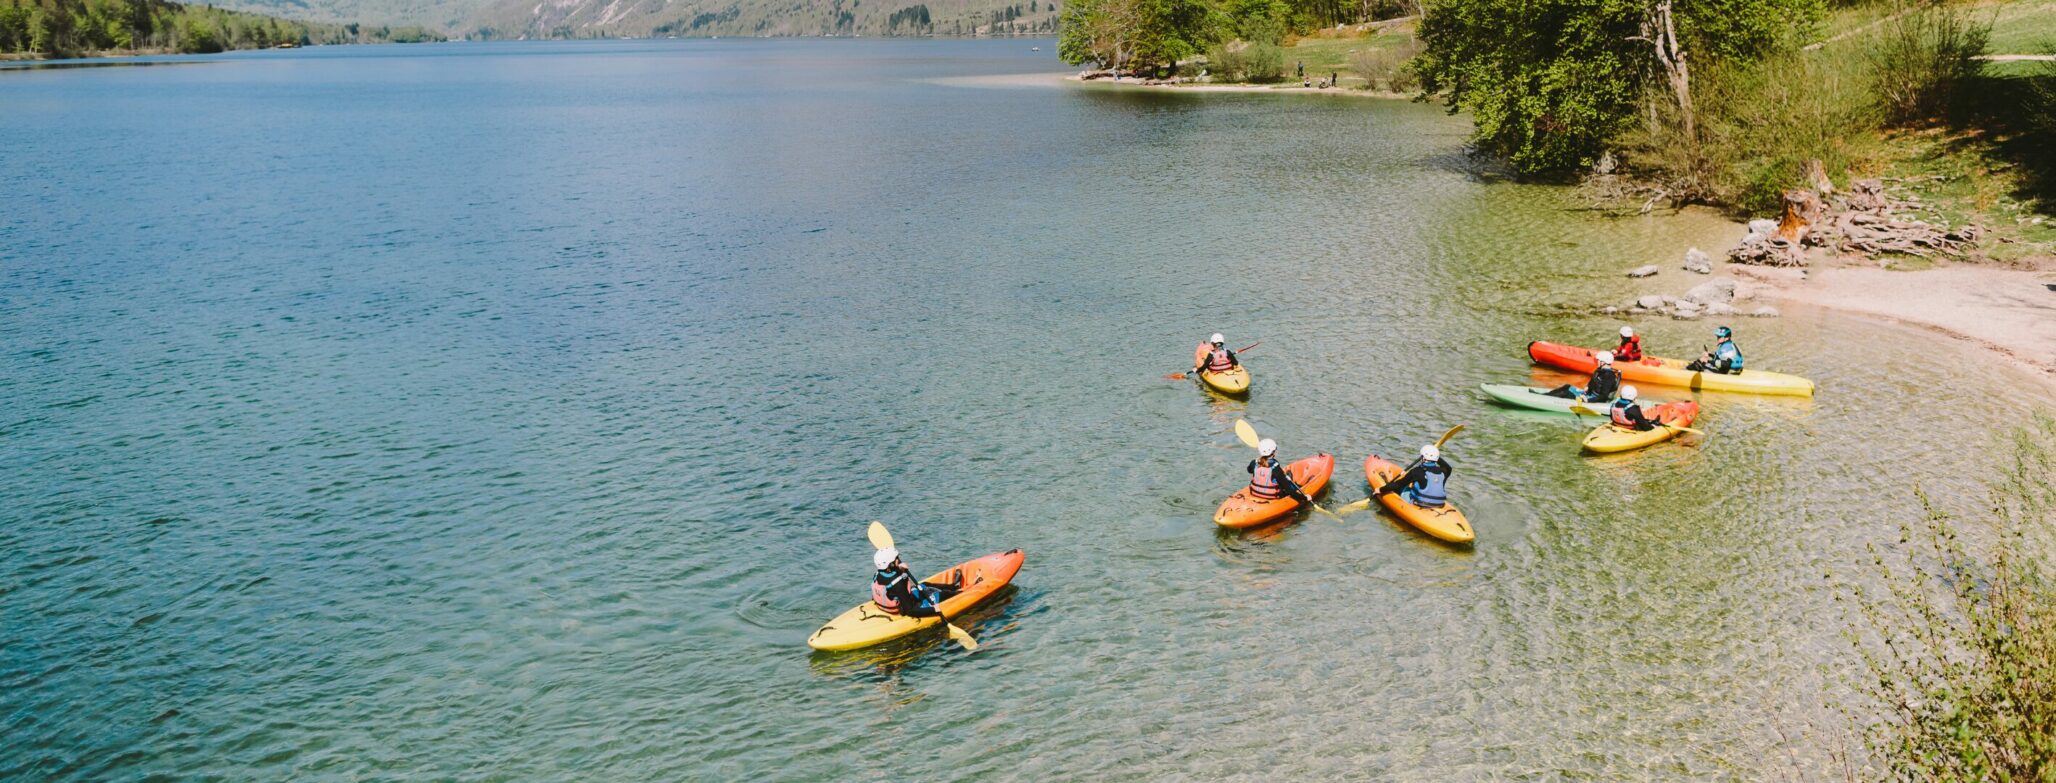 5 Risk Management Tips for Guided Kayaking Tours